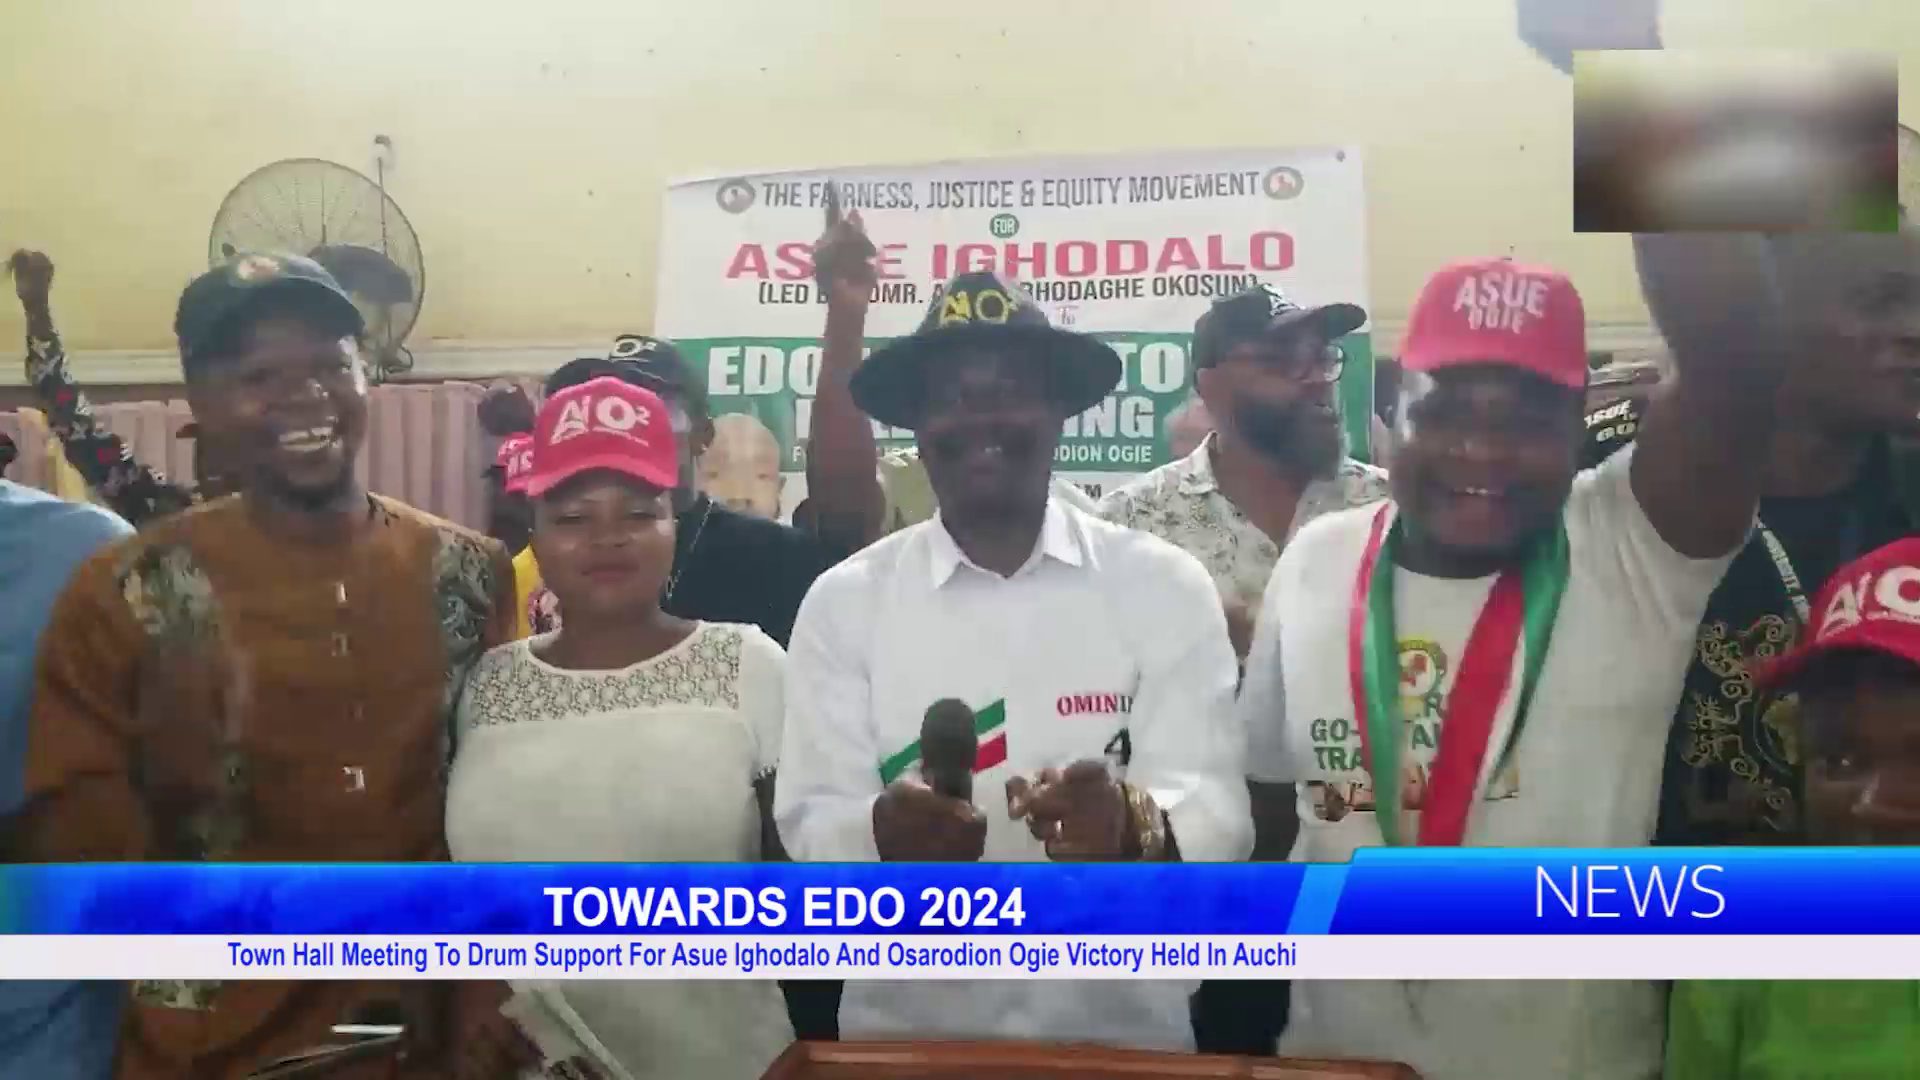 Town Hall Meeting To Drum Support For Asue Ighodalo And Osarodion Ogie Victory Held In Auchi